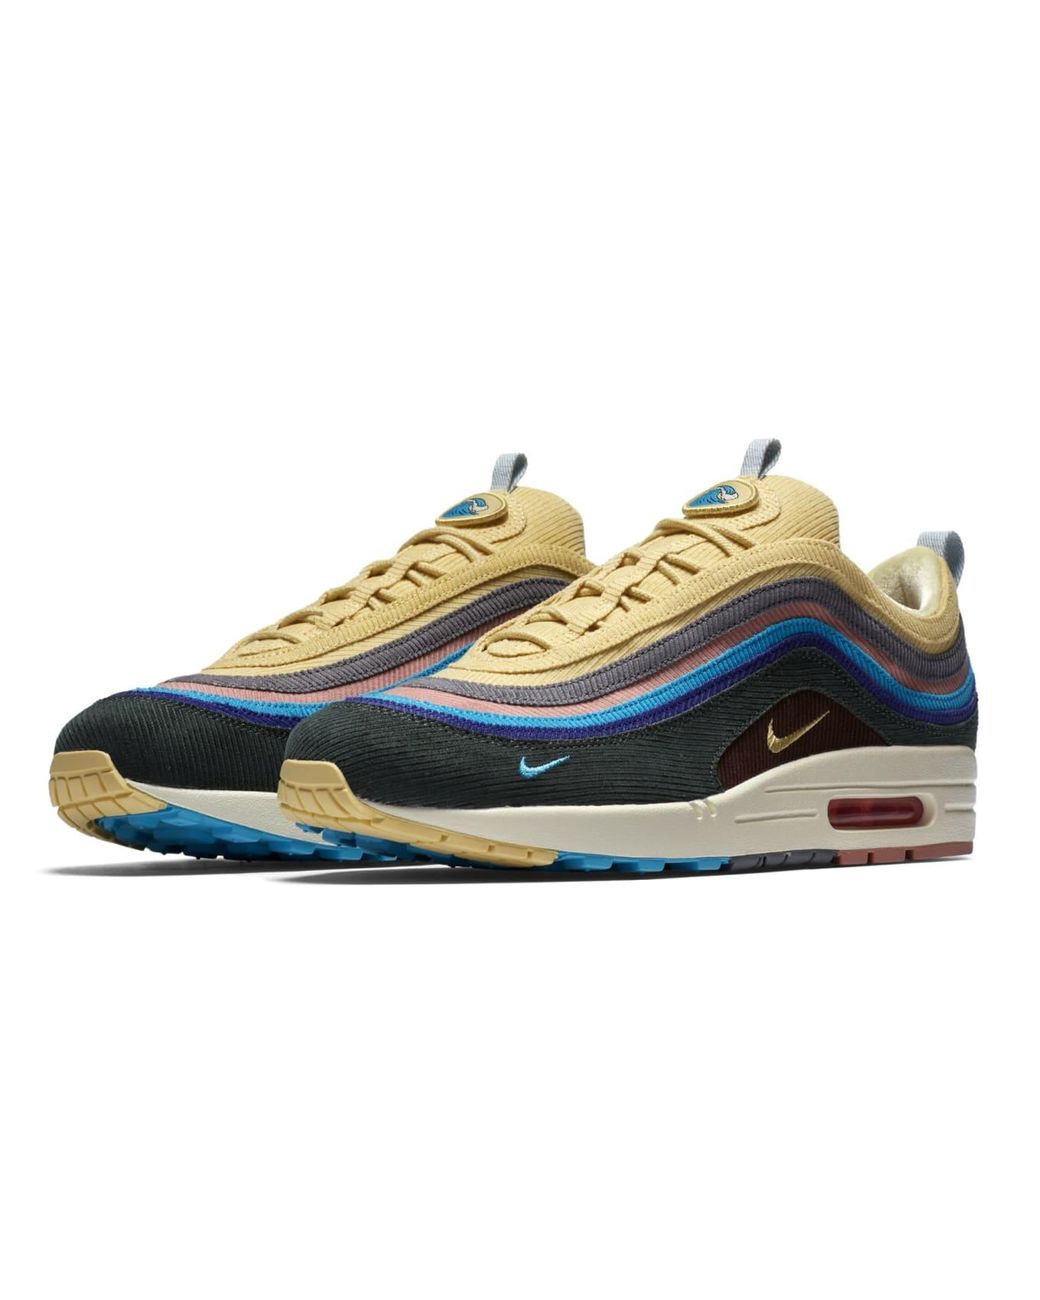 Nike X Sean Wotherspoon Air Max 1/97 Vf Sw Sneakers in Blue | Lyst